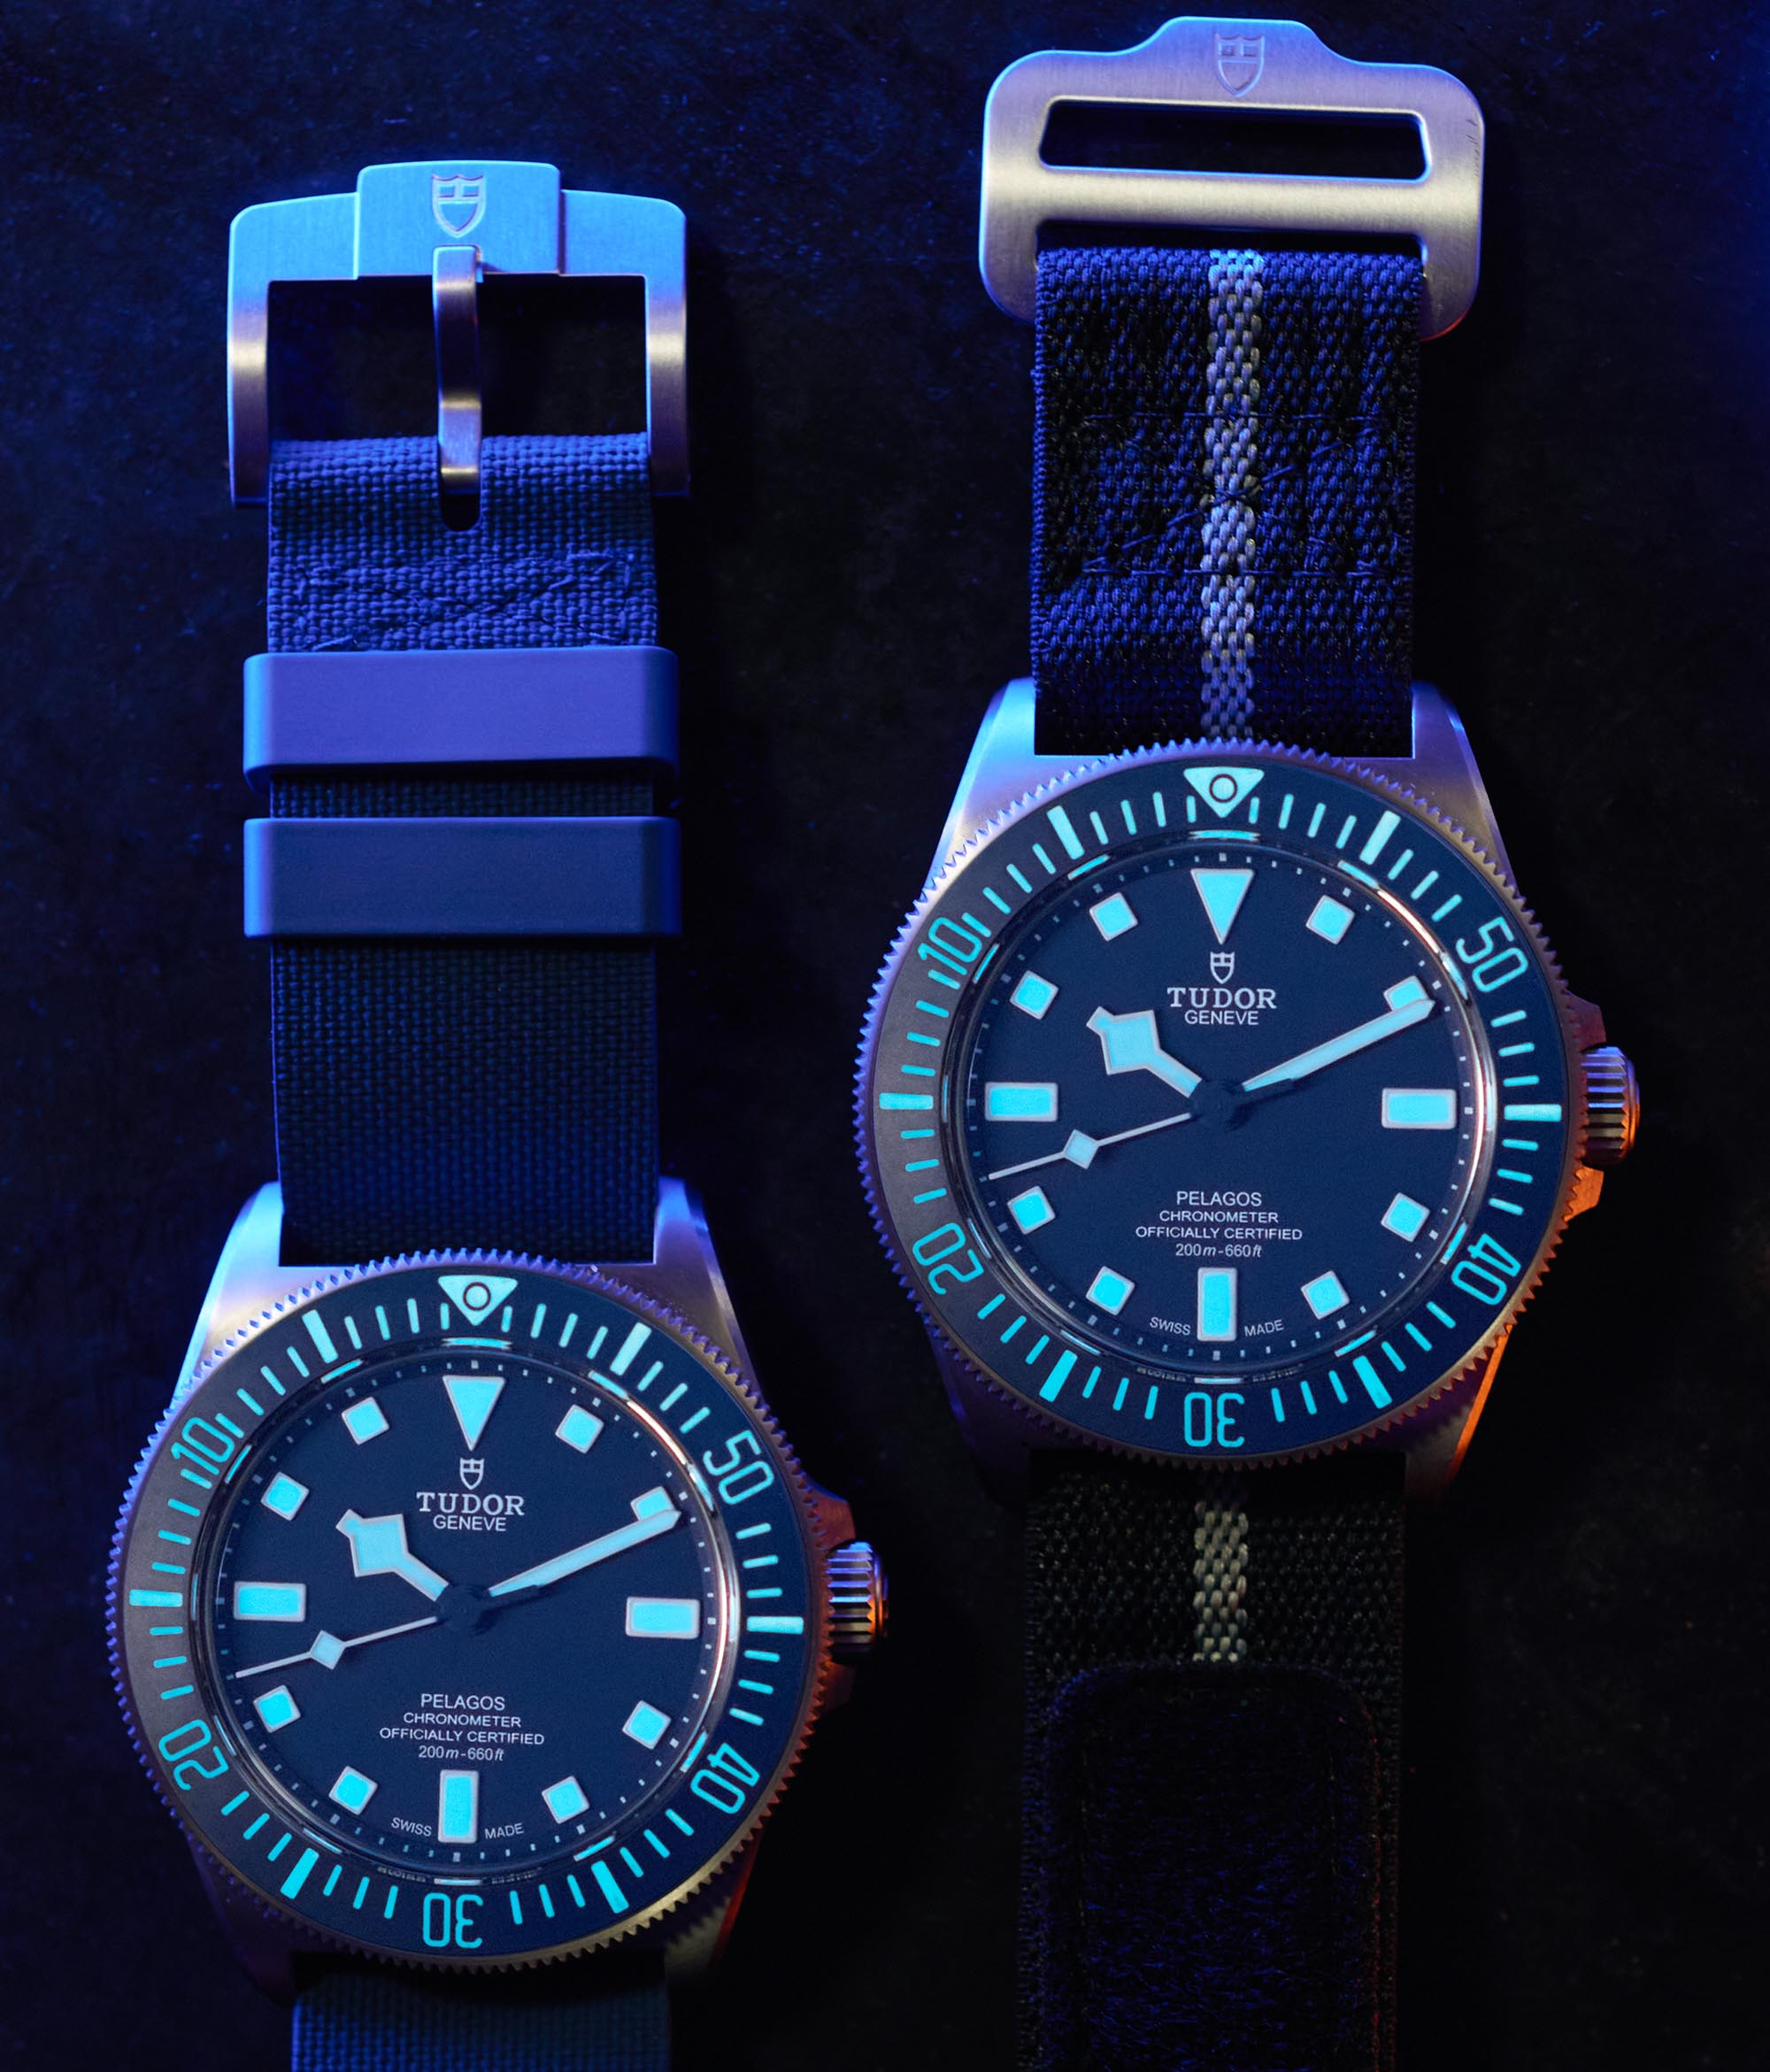 Tudor Pelagos FXD Watch Developed With The Marine Nationale